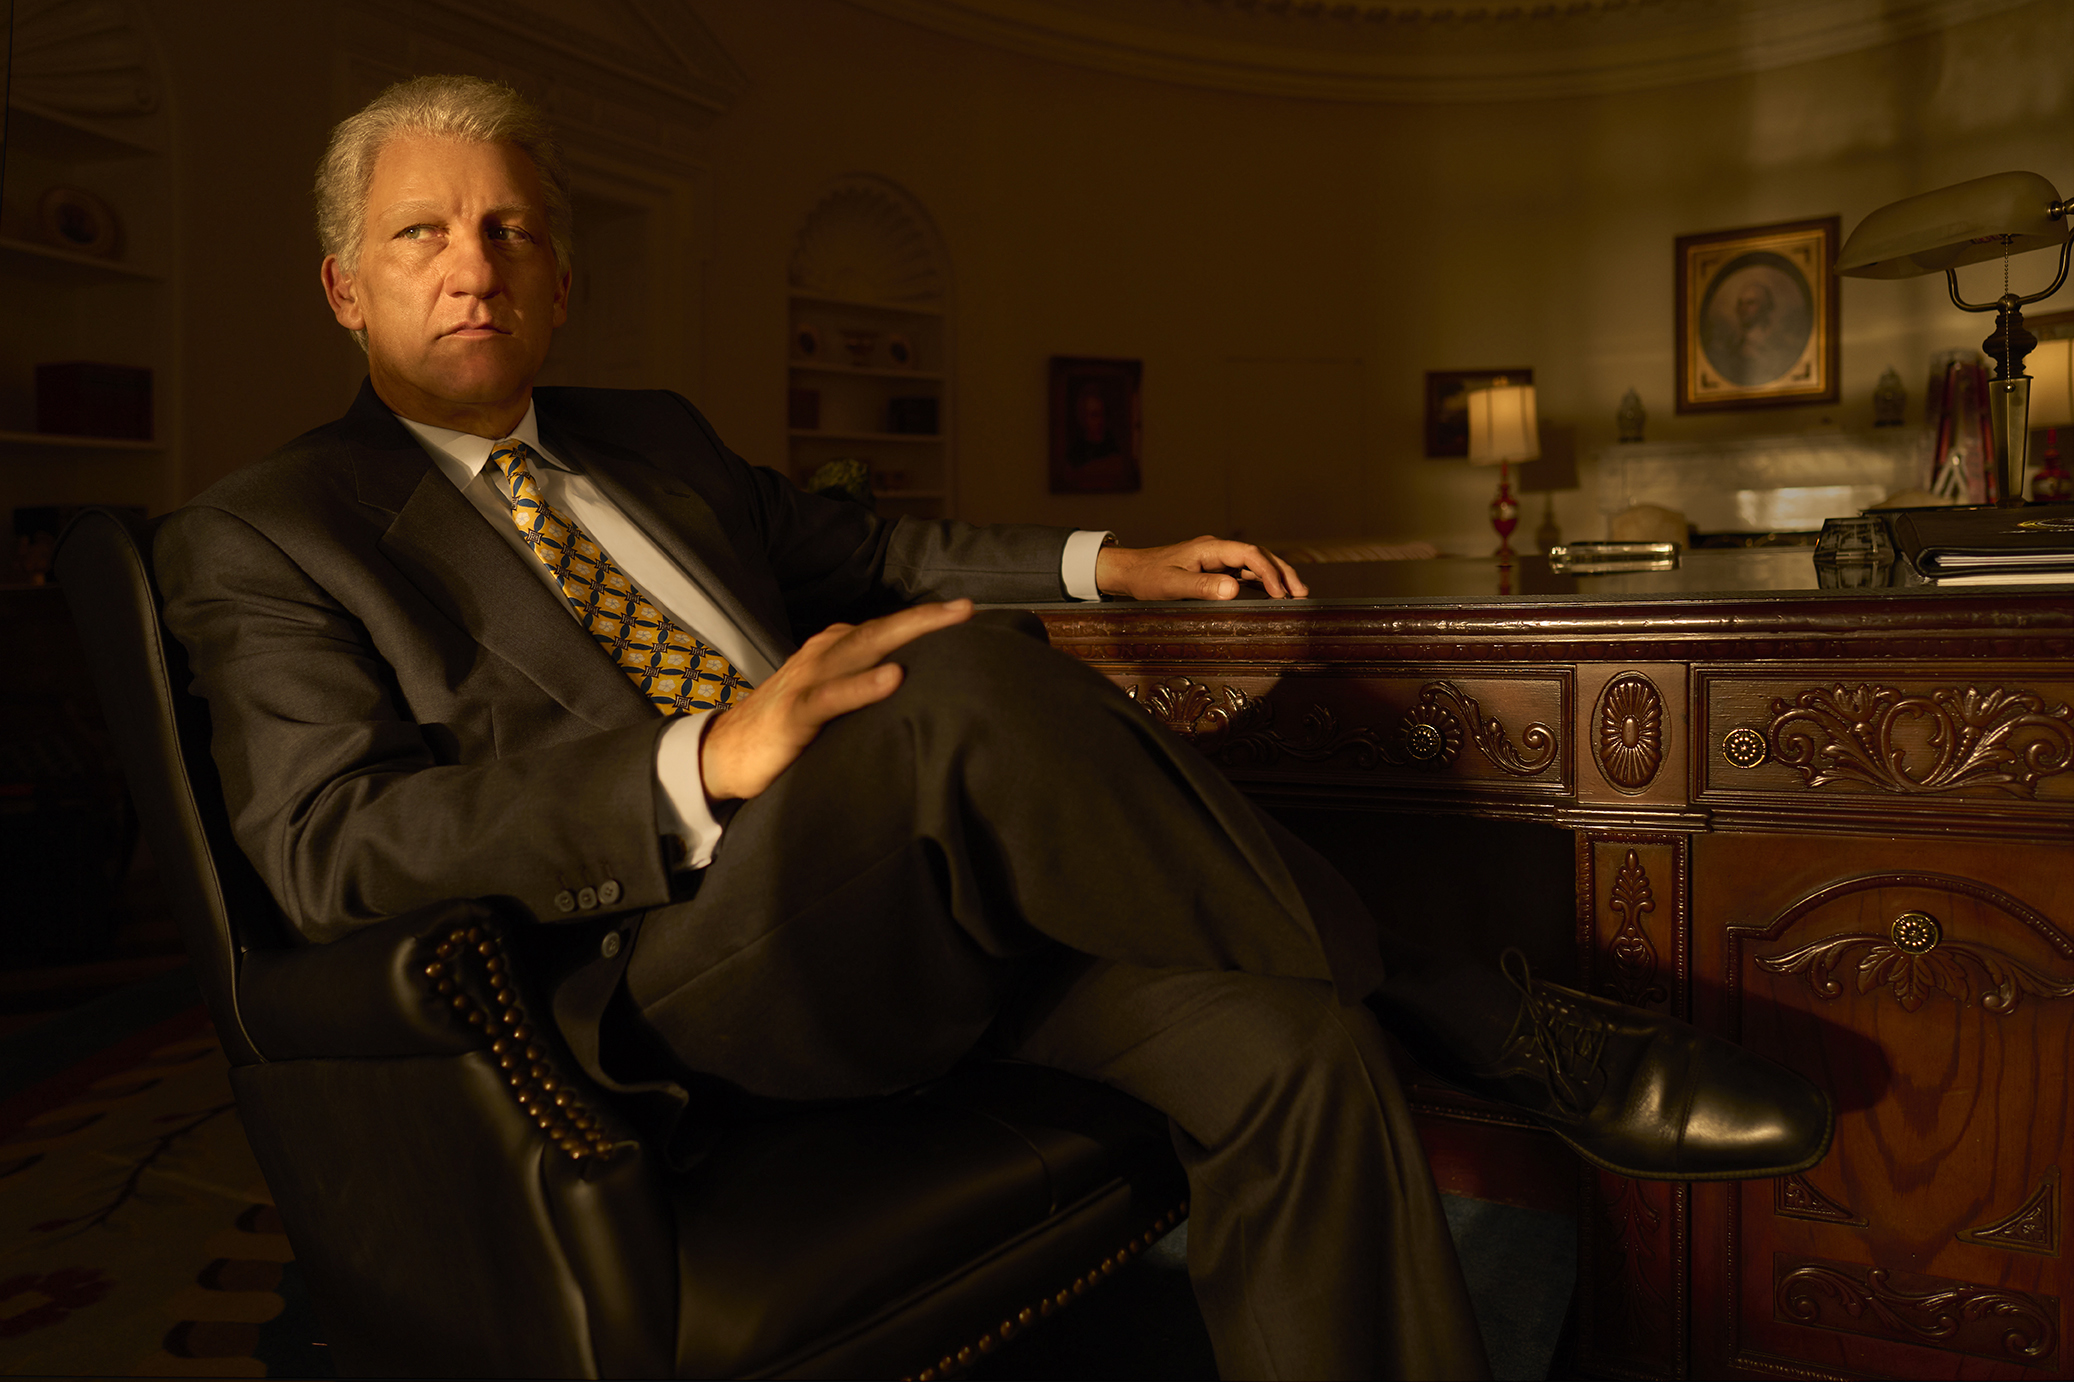 PHOTO: Clive Owen as Bill Clinton in "Impeachment: American Crime Story."